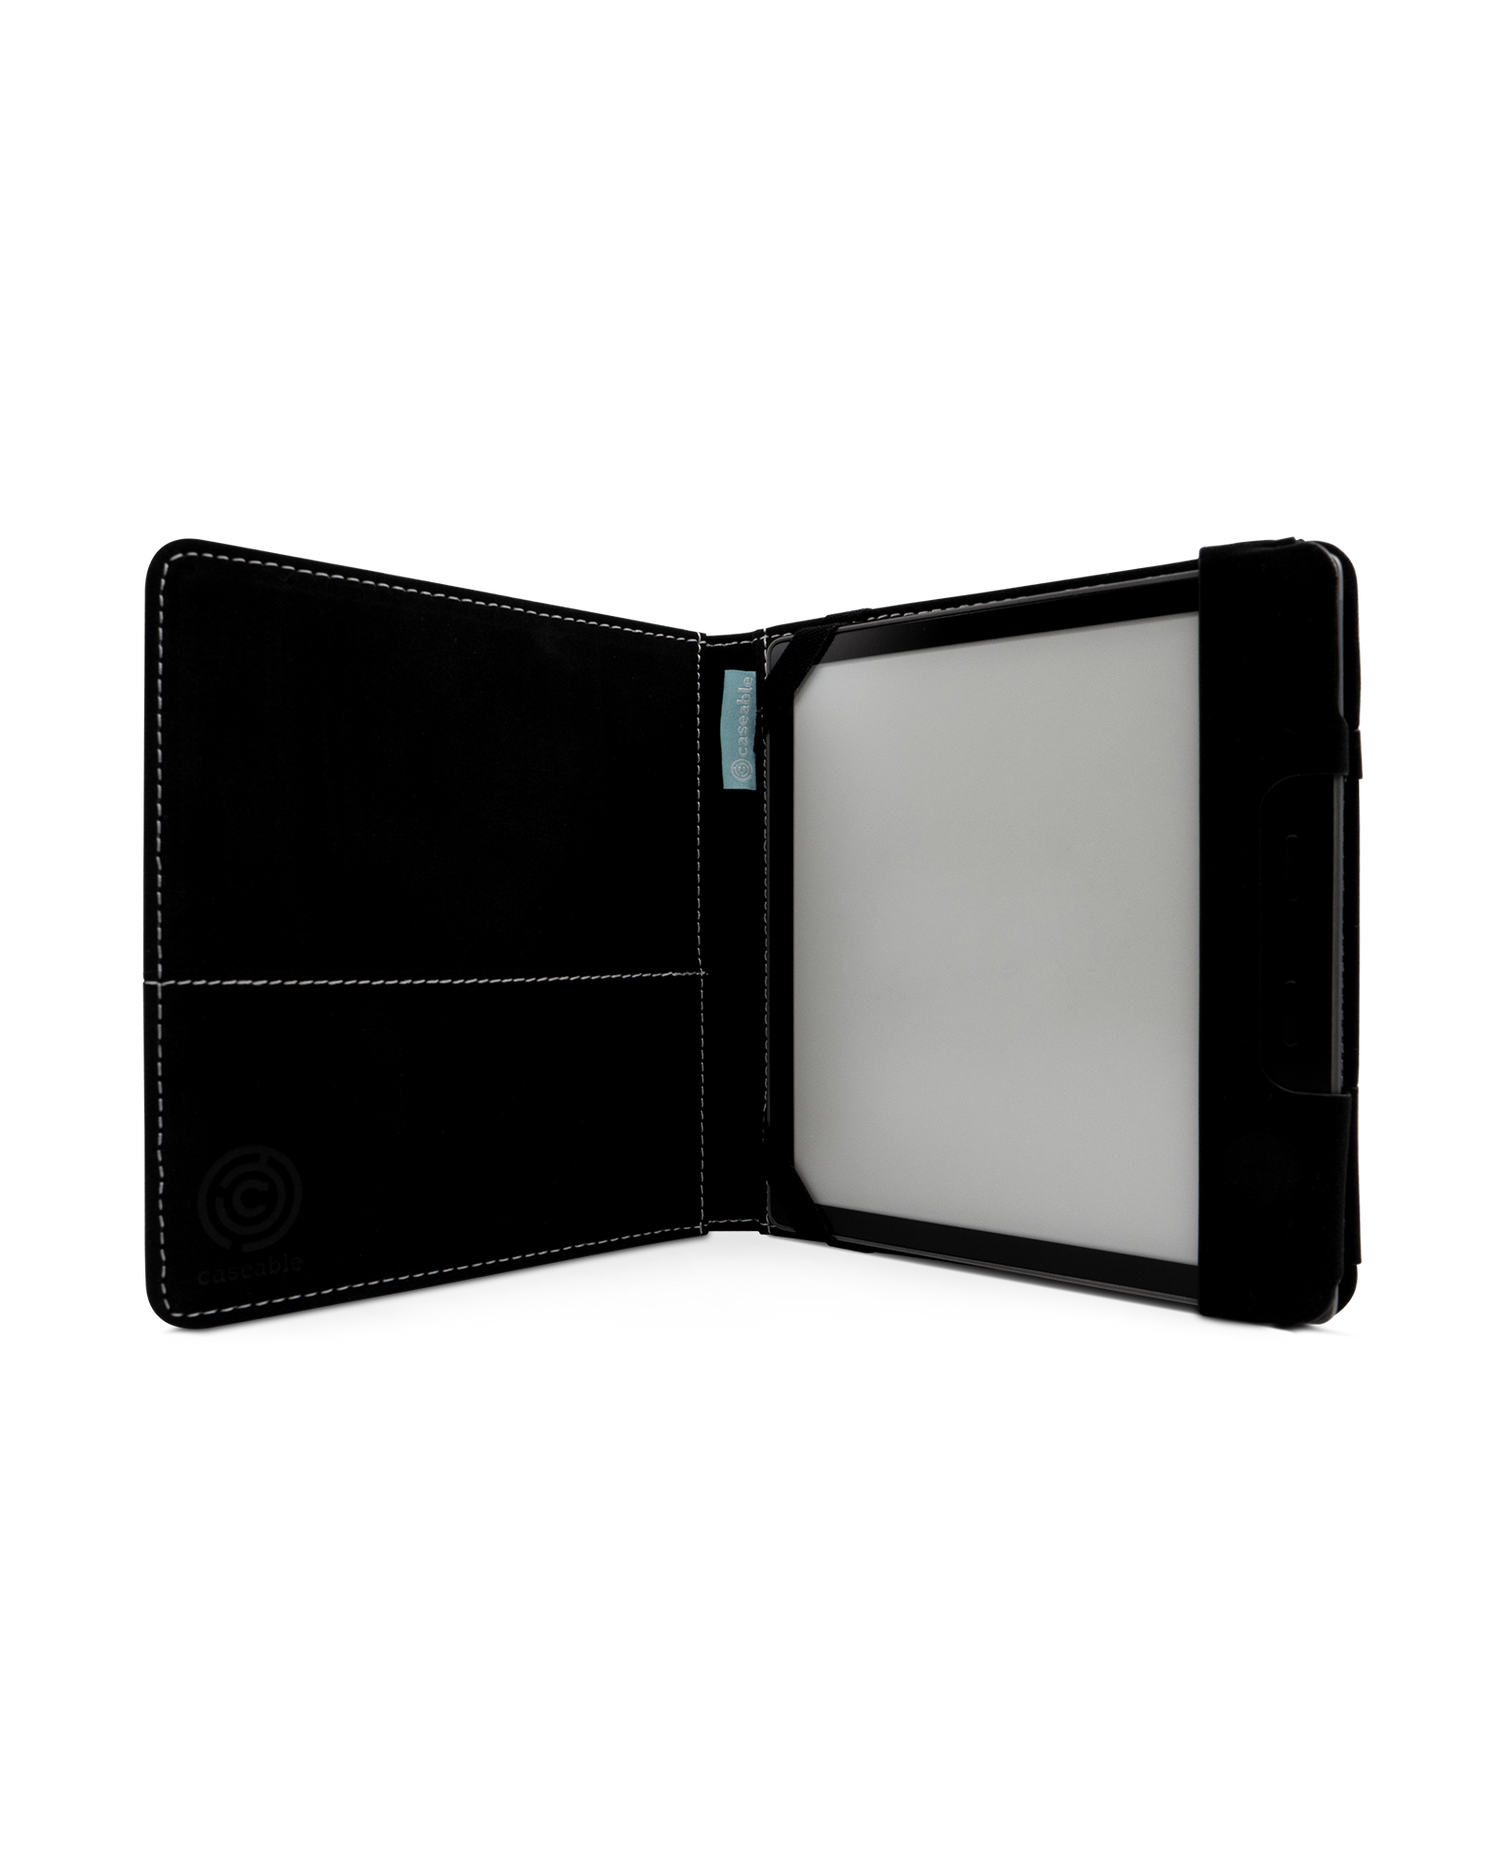 LGBTQ eReader Case for tolino vision 6: Opened interior view